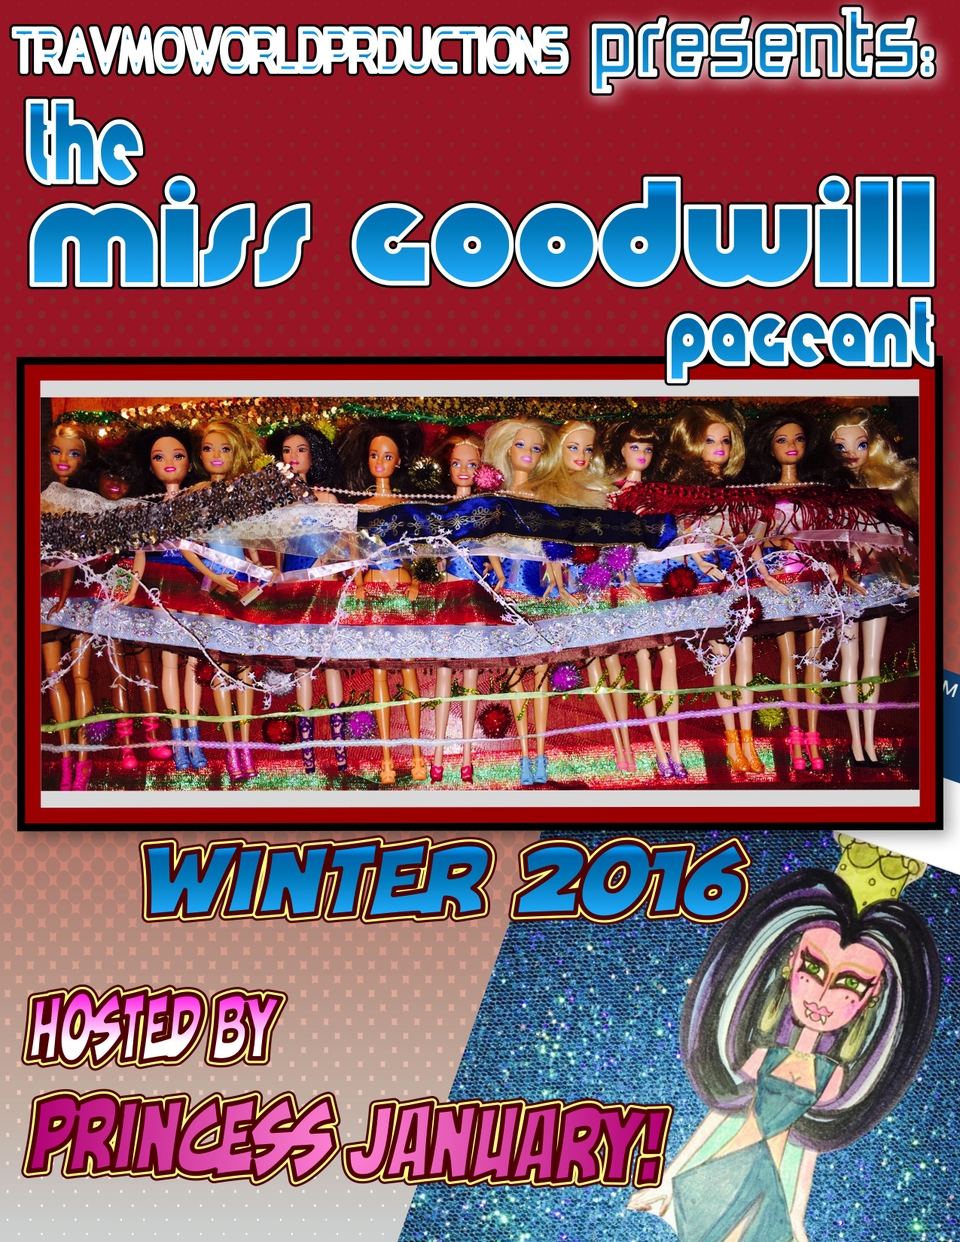 Living In Chrome : The Miss Goodwill Pageant Cover hosted by Princess January